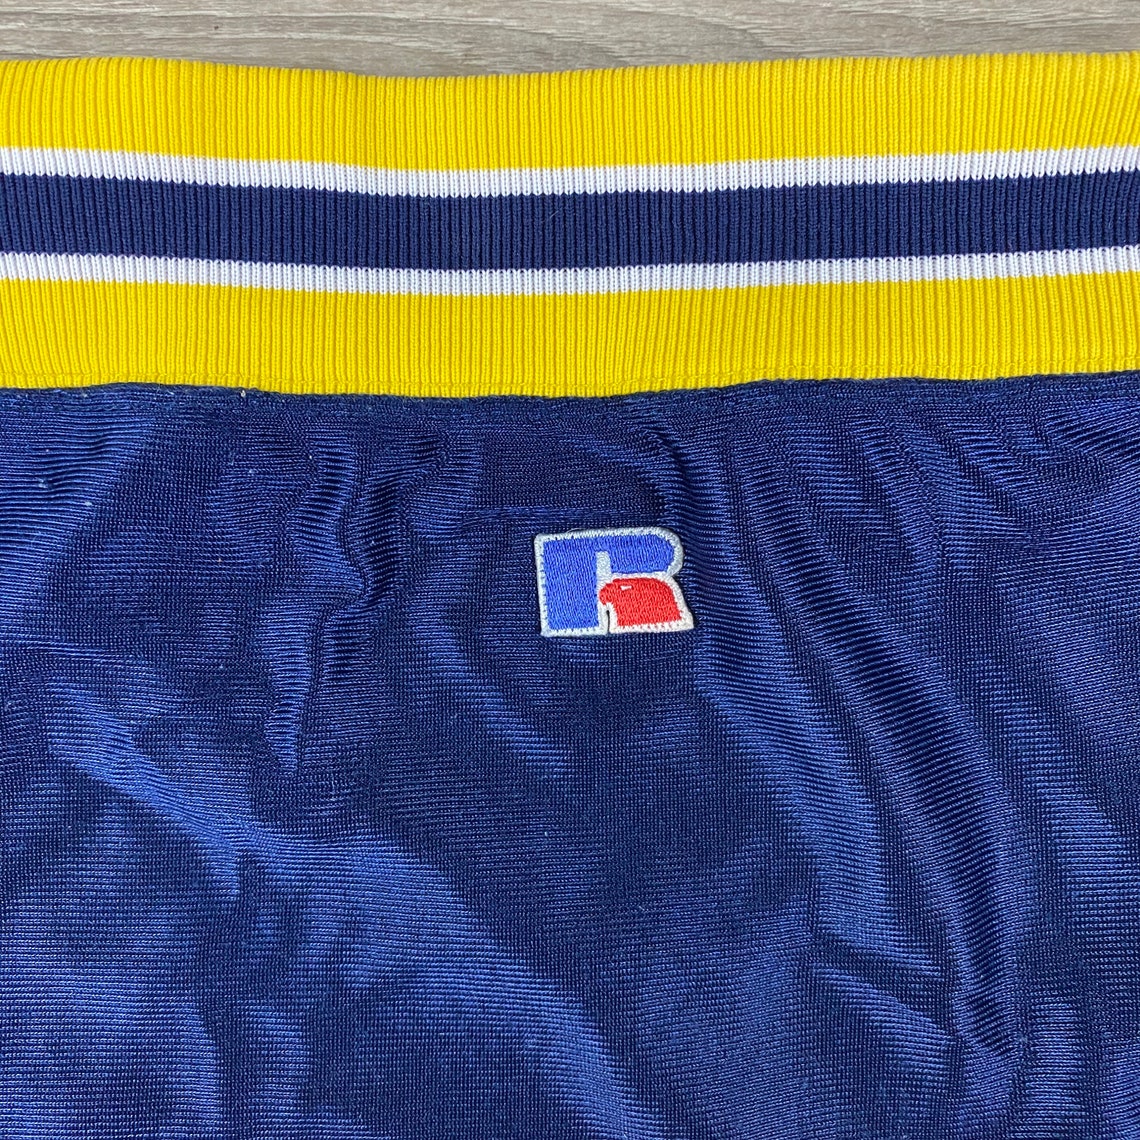 90s Fab Five Michigan Basketball Shorts Team Issue by Russell - Etsy